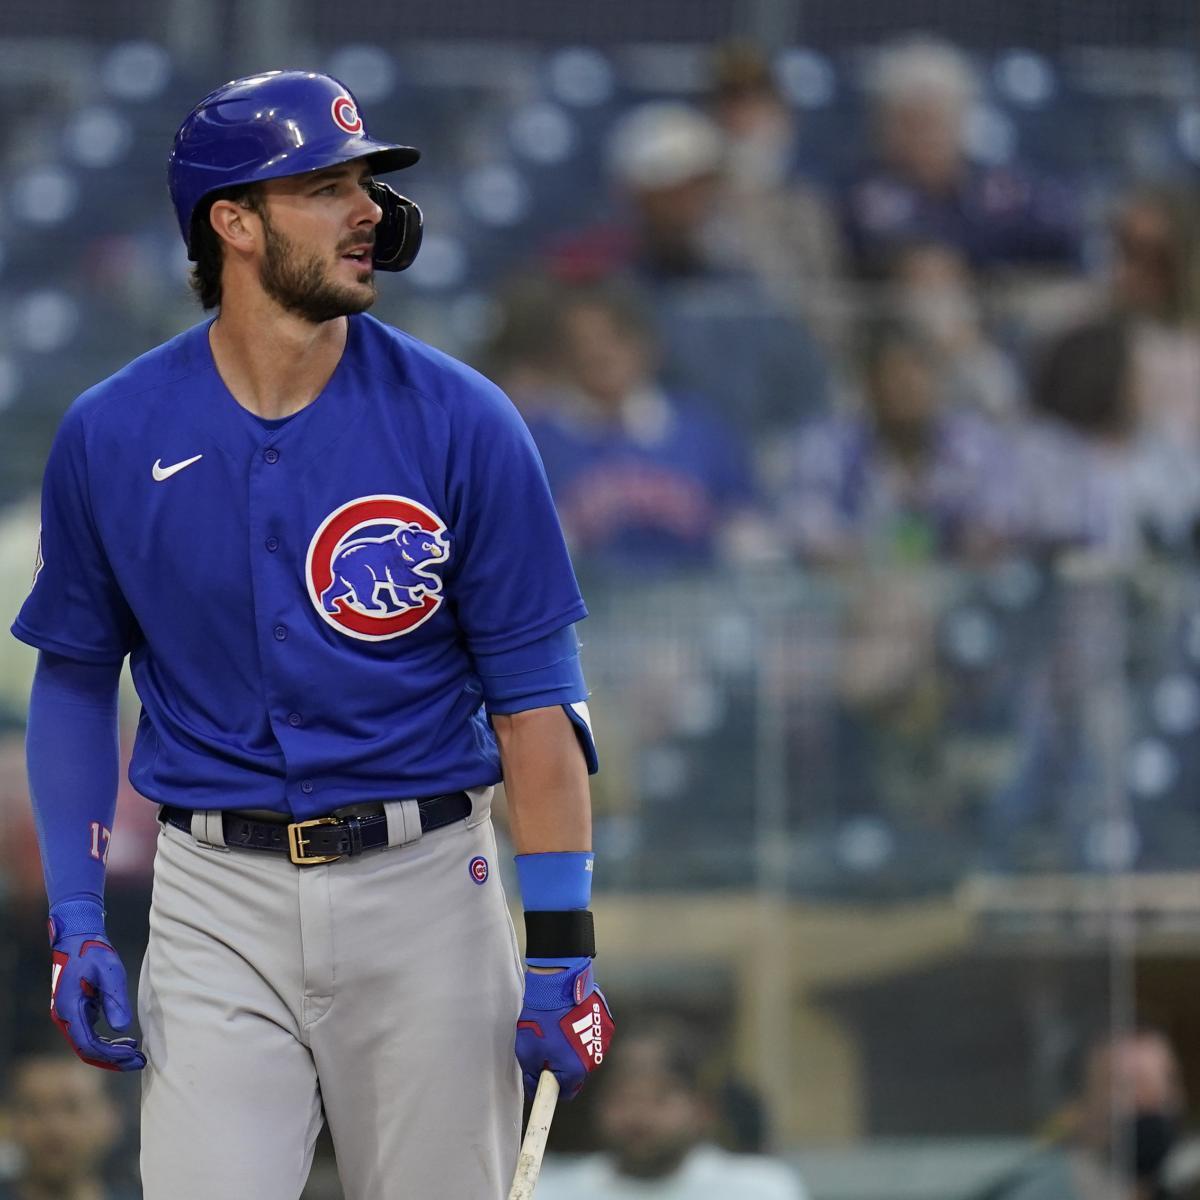 After Months of Questions, the Cubs Ought to peaceful Trade Kris Bryant